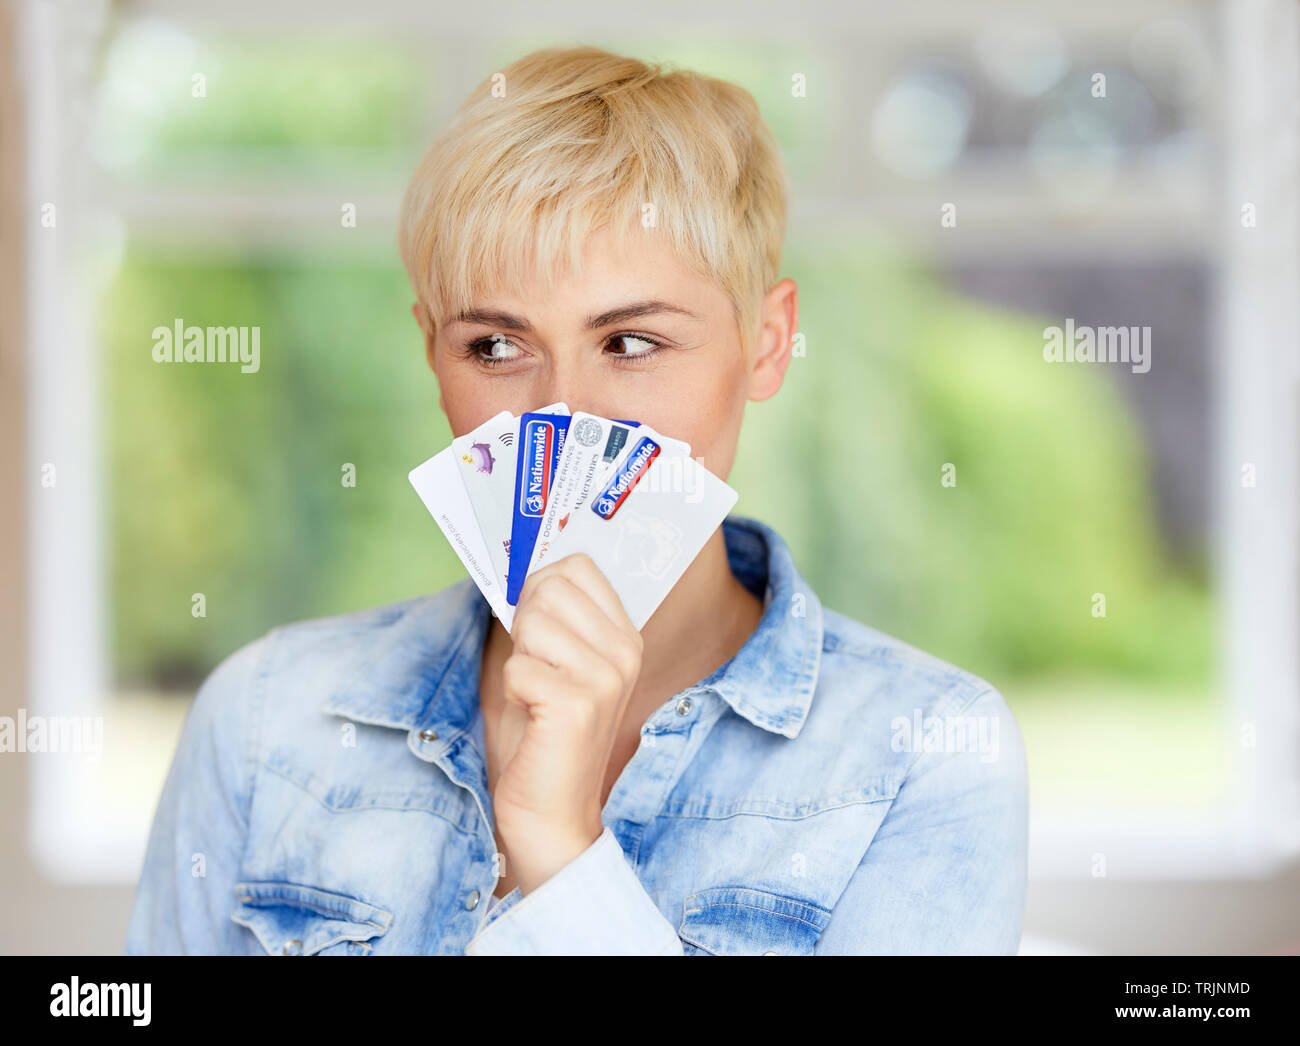 Woman holding credit cards Banque D'Images